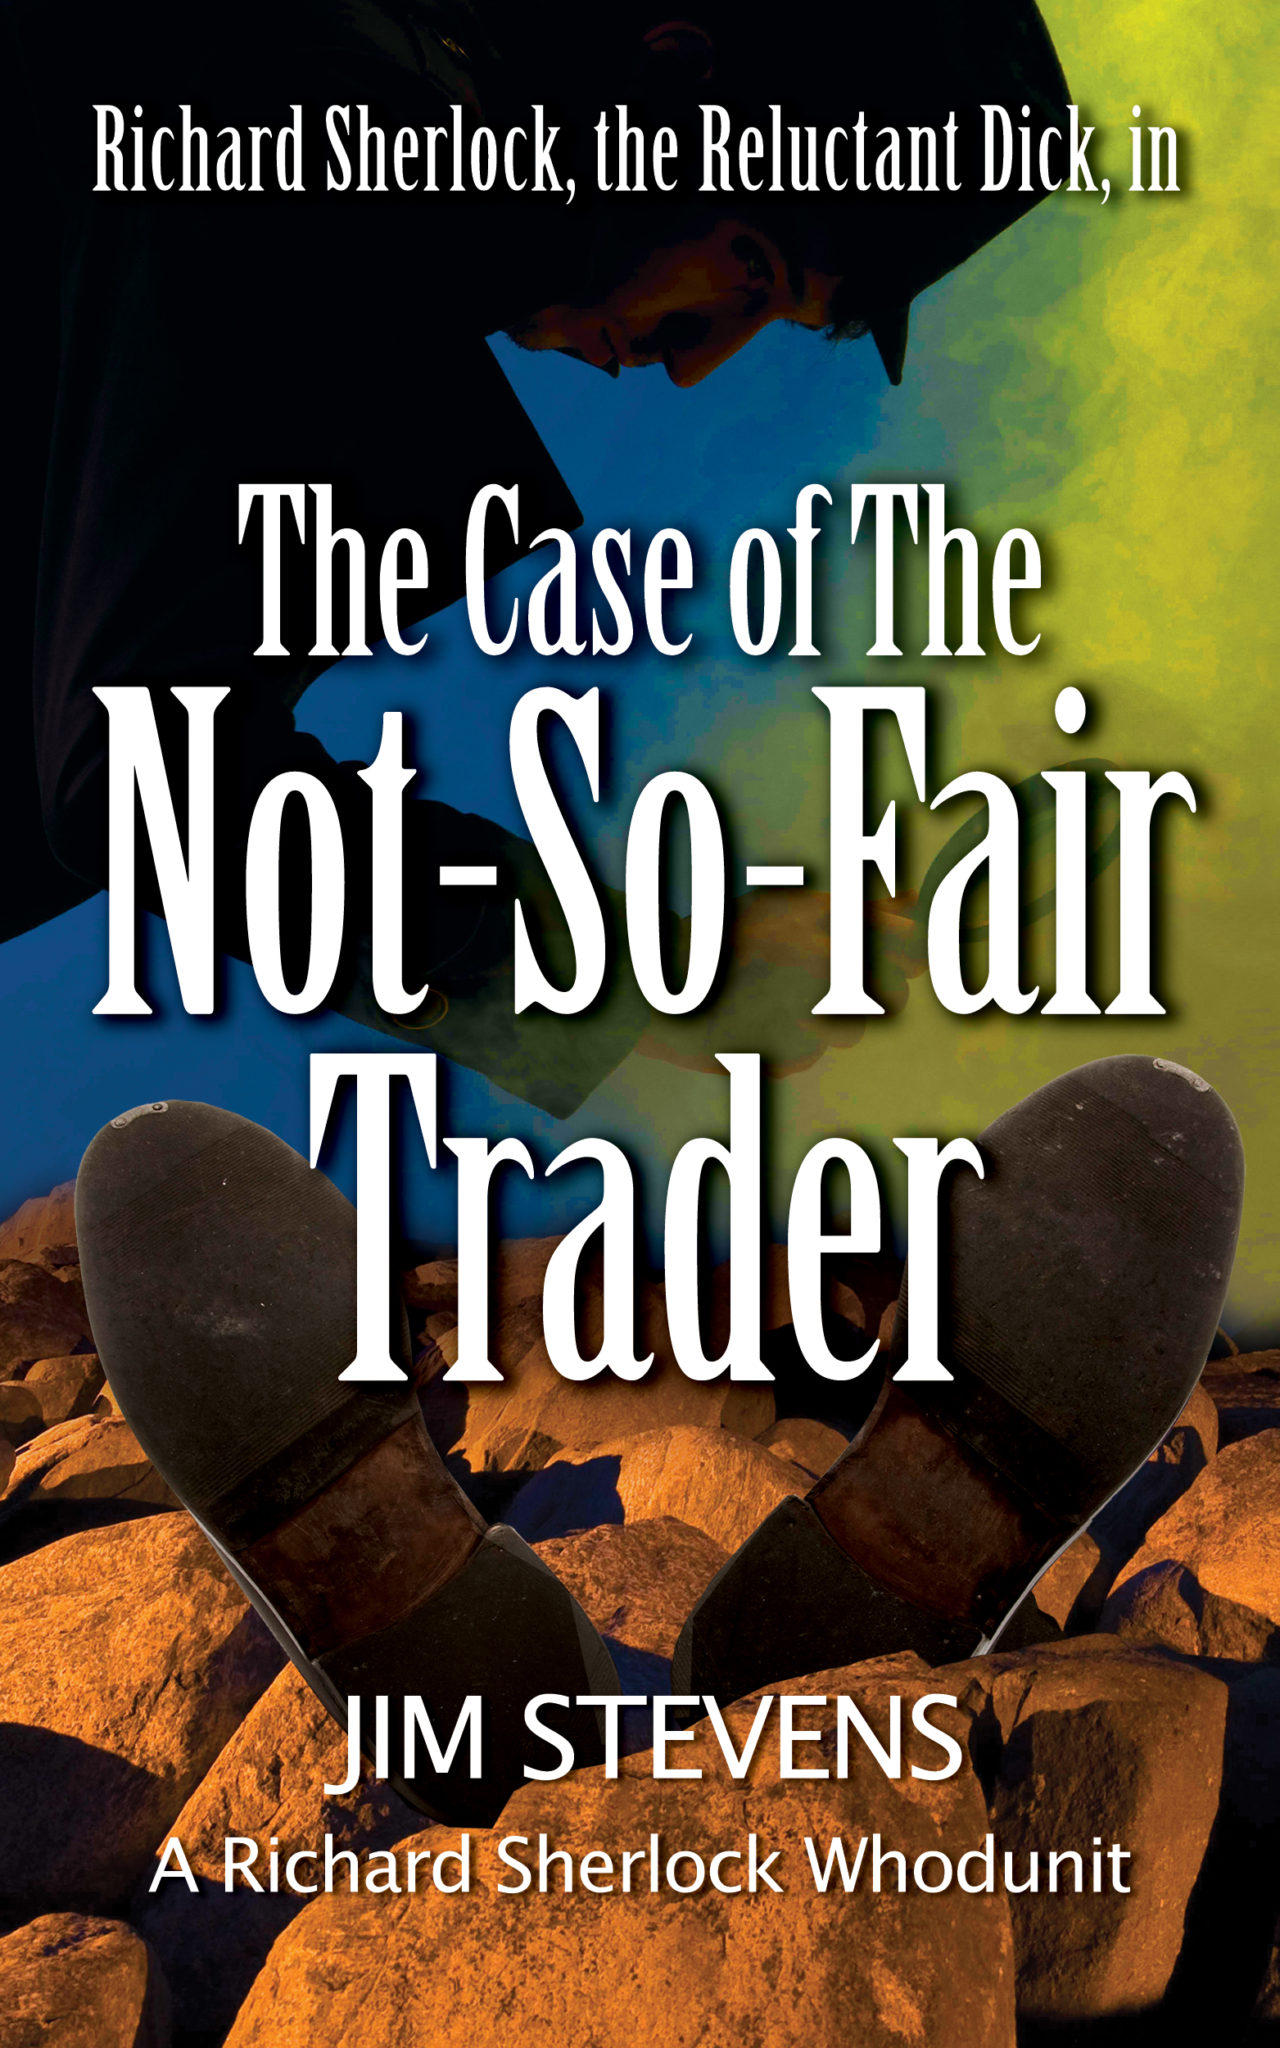 FREE: The Case of the Not-So-Fair Trader (A Richard Sherlock Whodunit Book 1) by Jim Stevens